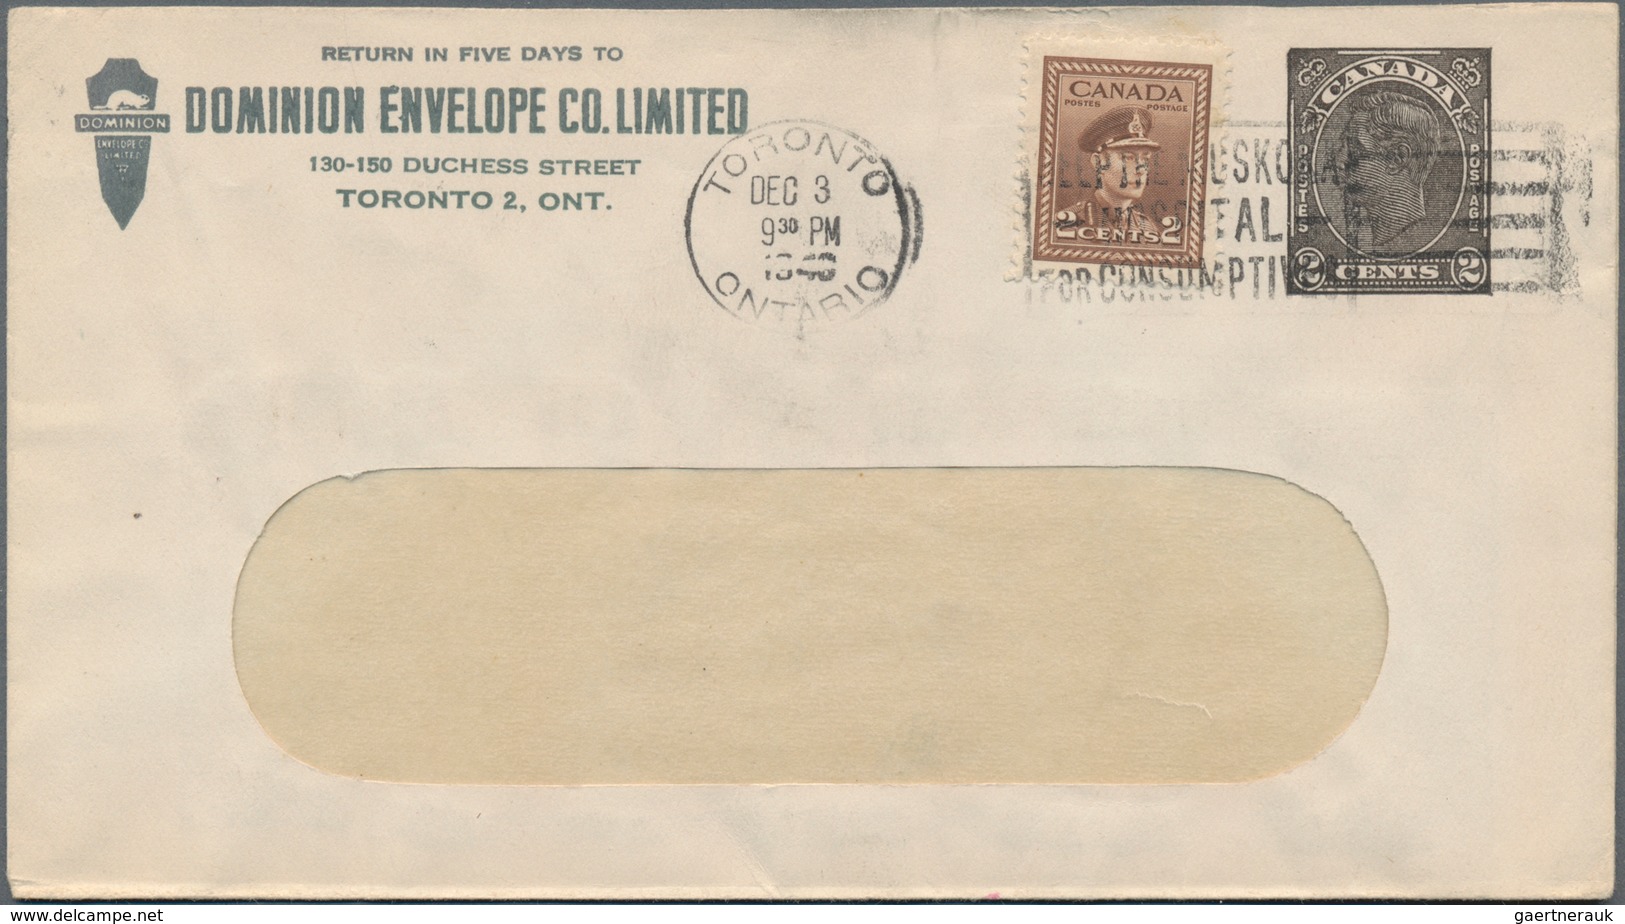 Canada - Ganzsachen: 1880/1998, accumulation of approx. 710 unused, CTO-used and used postal station